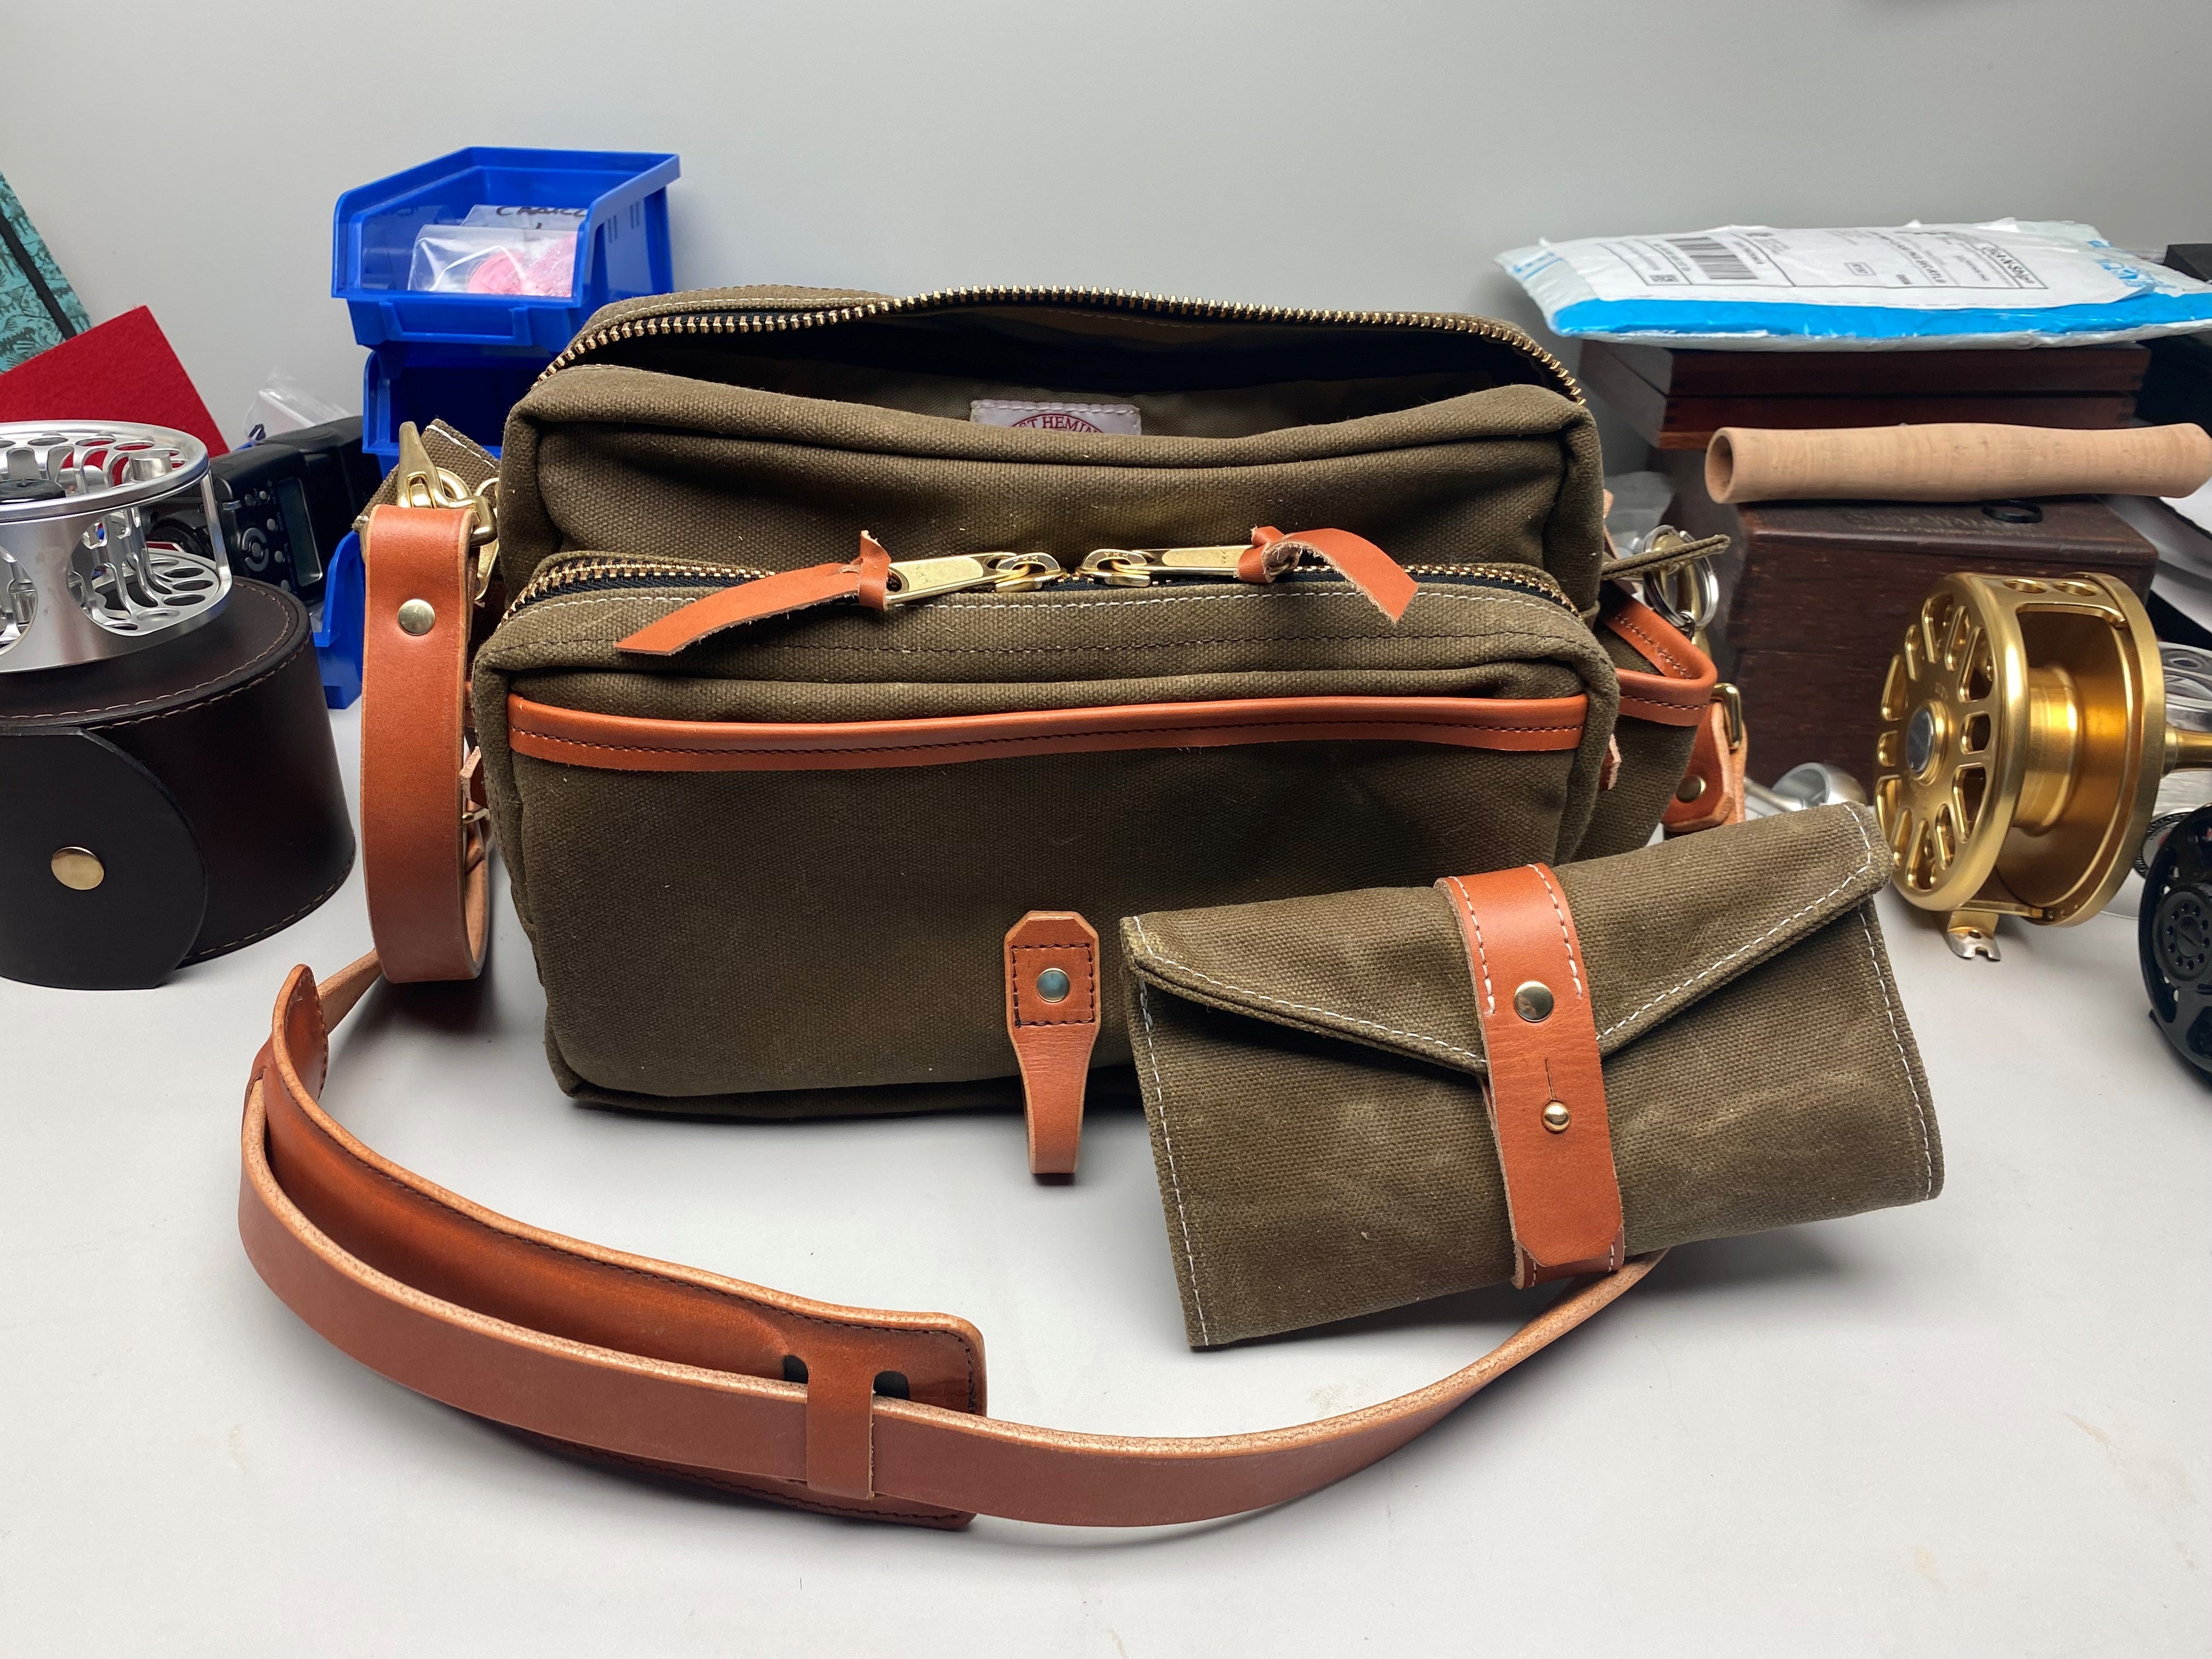 Fishing Satchel/ Reel Case with fly wallet.